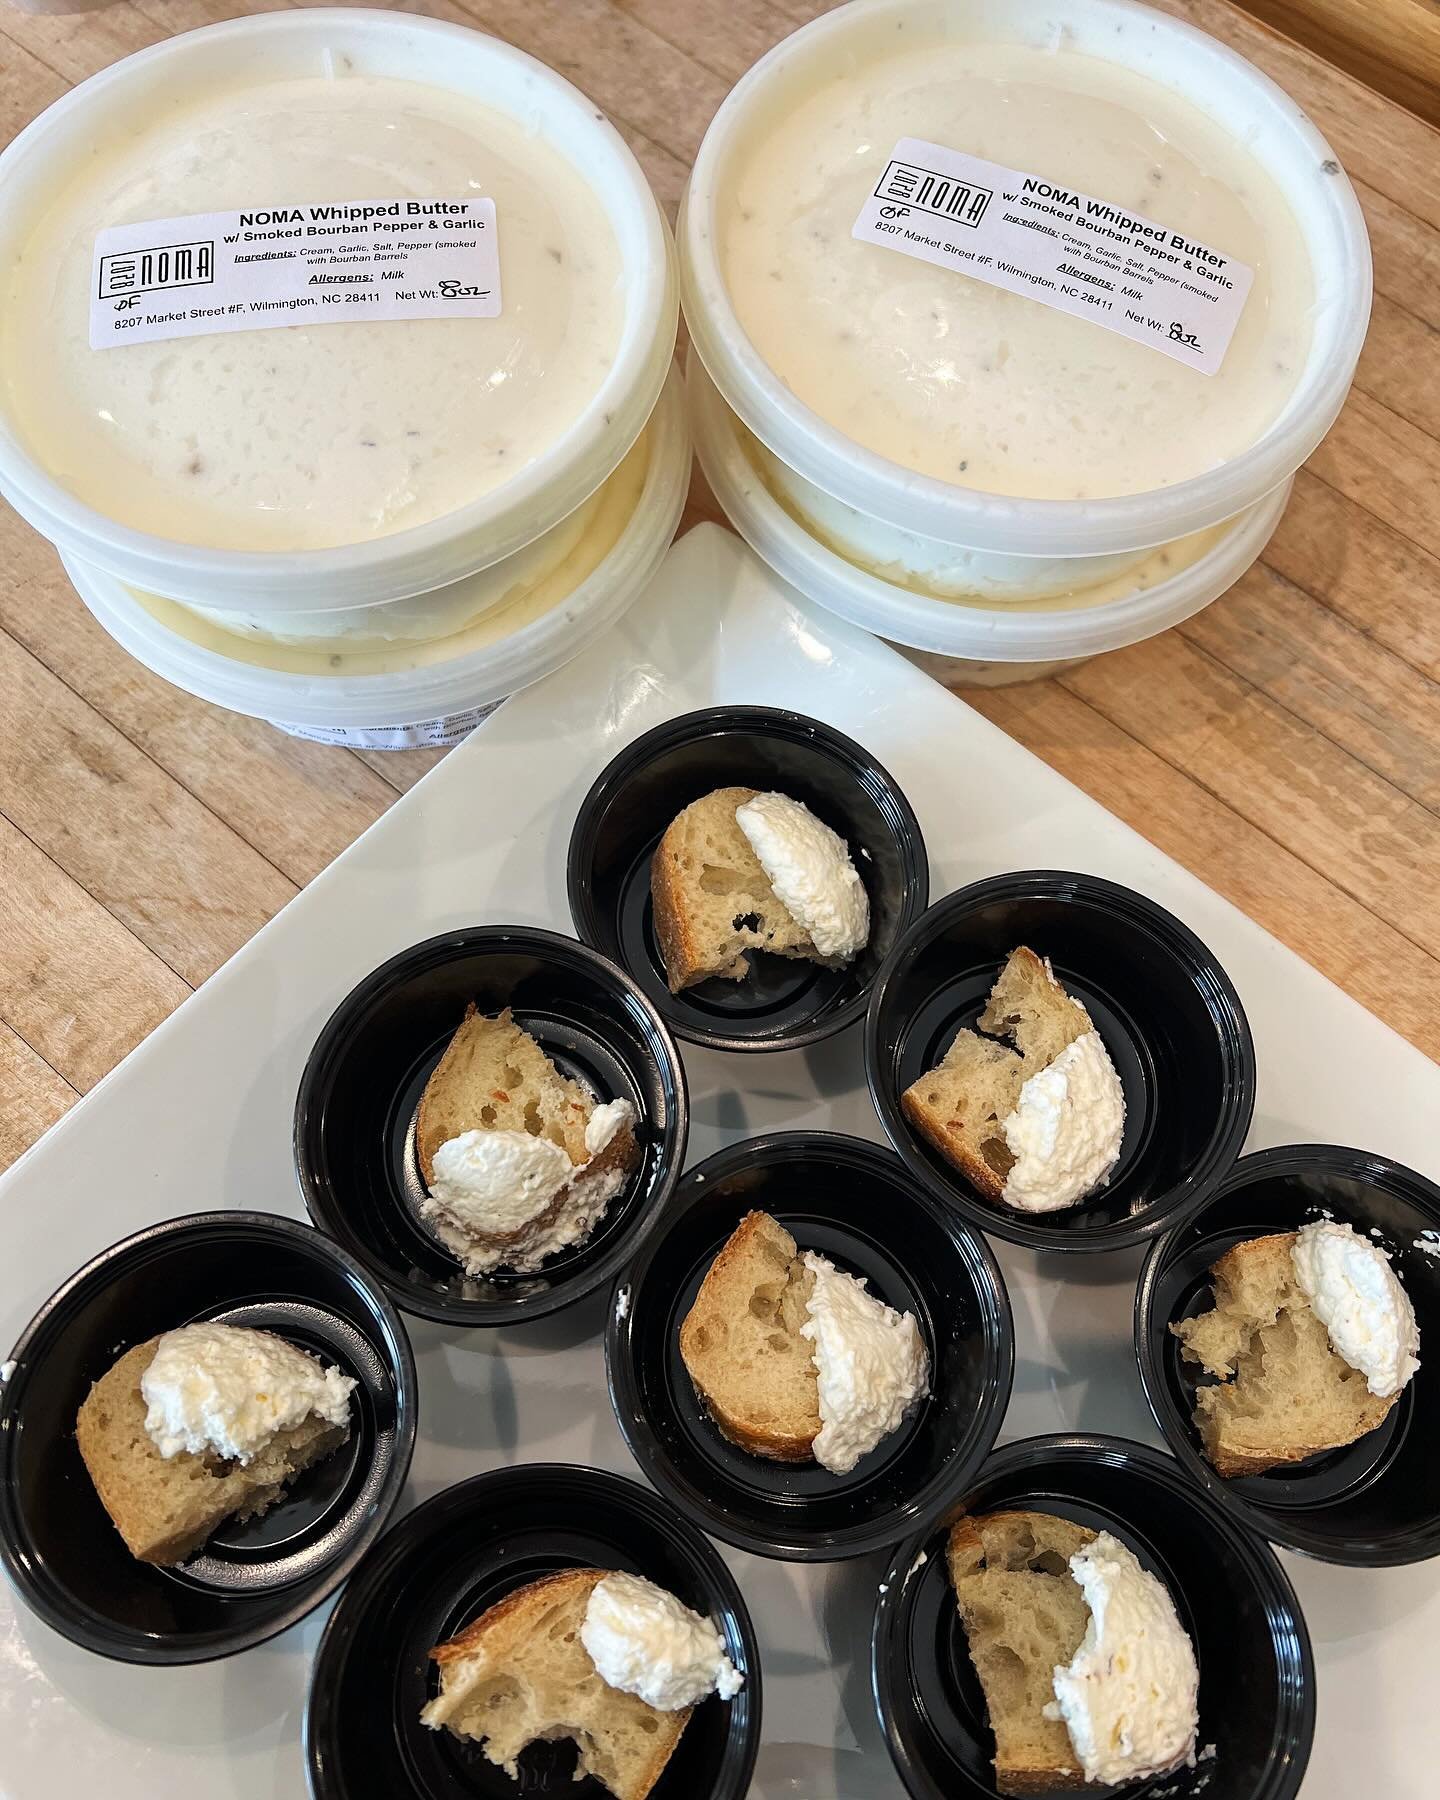 We&rsquo;re trying something NEW!! Big Al has ~whipped~ up some delicious butter and we&rsquo;re letting you all taste it! NOMA Whipped Butter with Smoked Bourbon Pepper &amp; Garlic $4.50